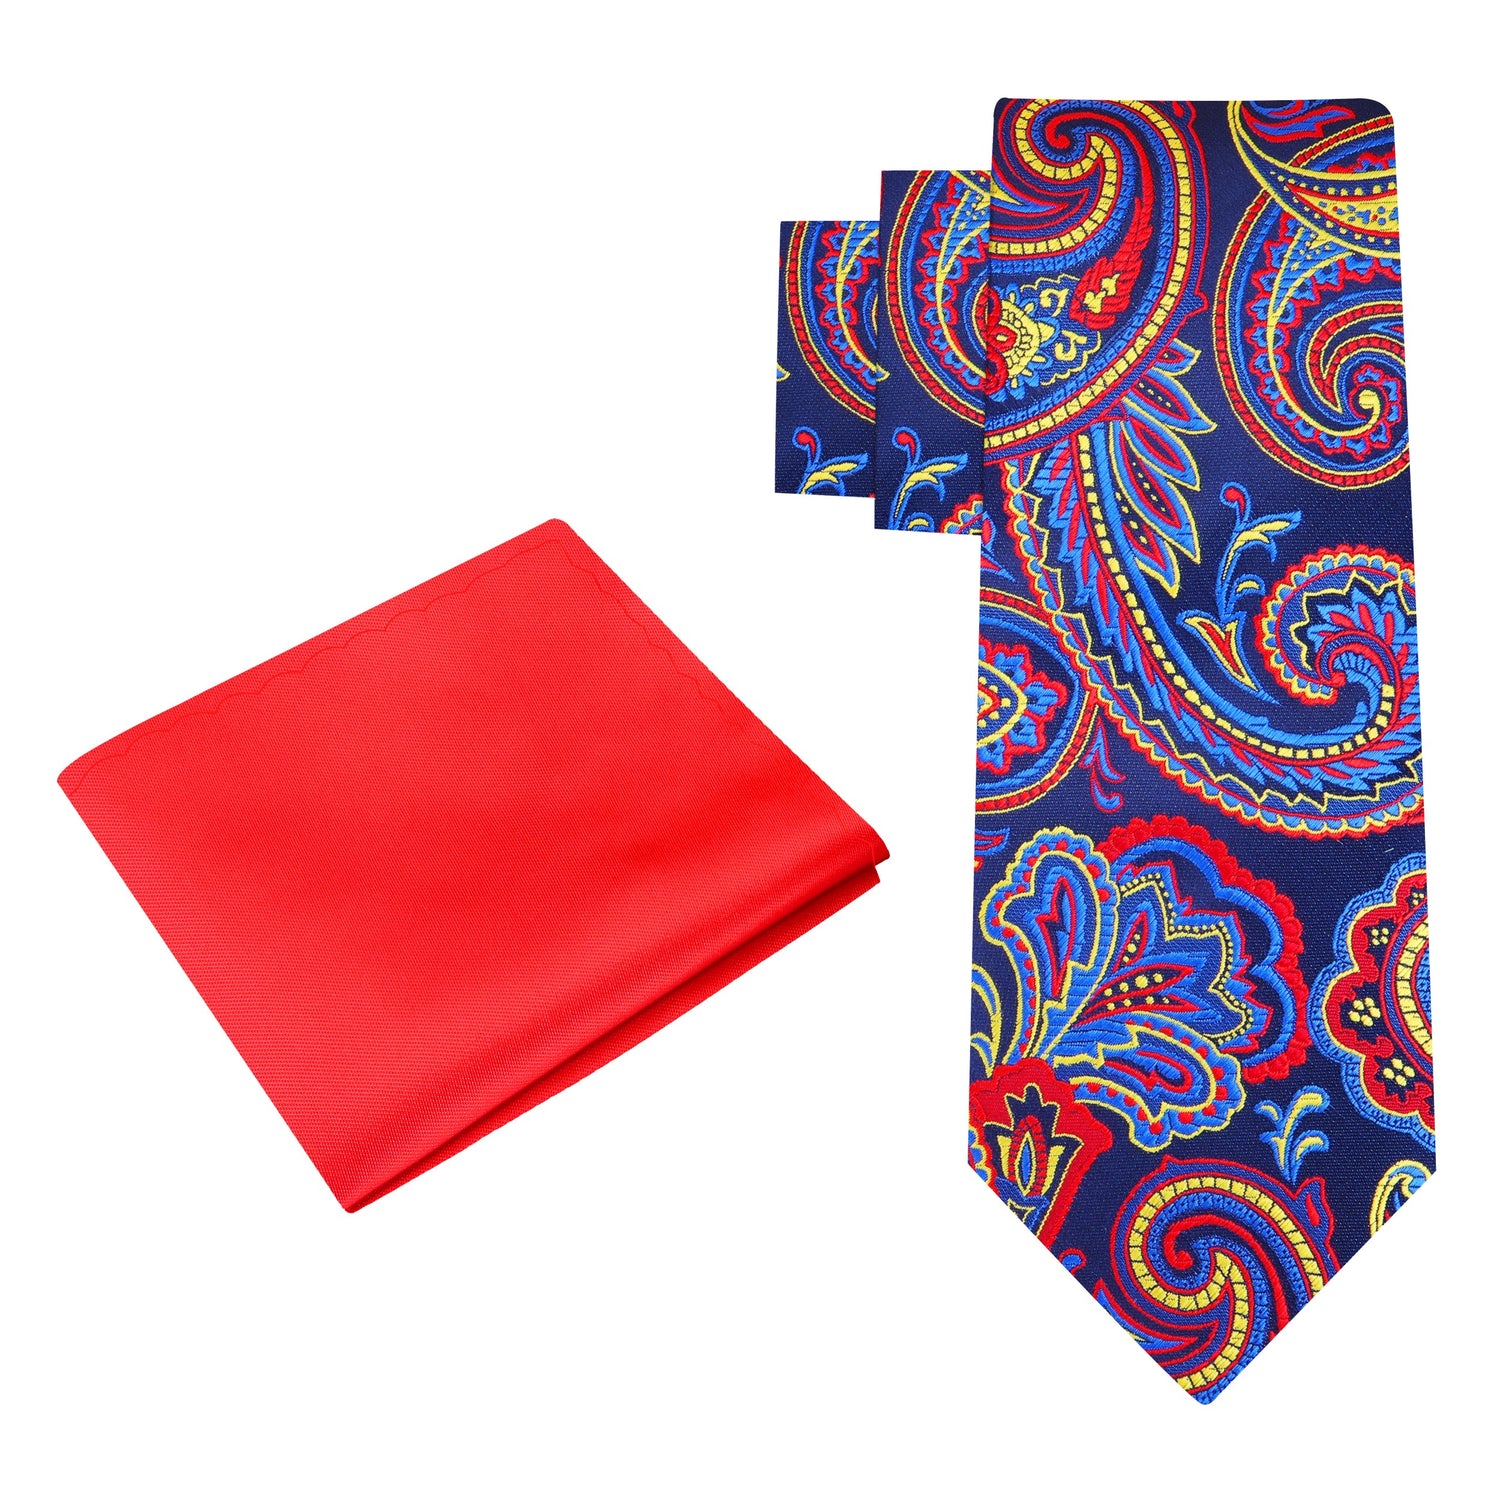 Alt View: Blue, Red and Yellow Paisley Tie and Red Pocket Square